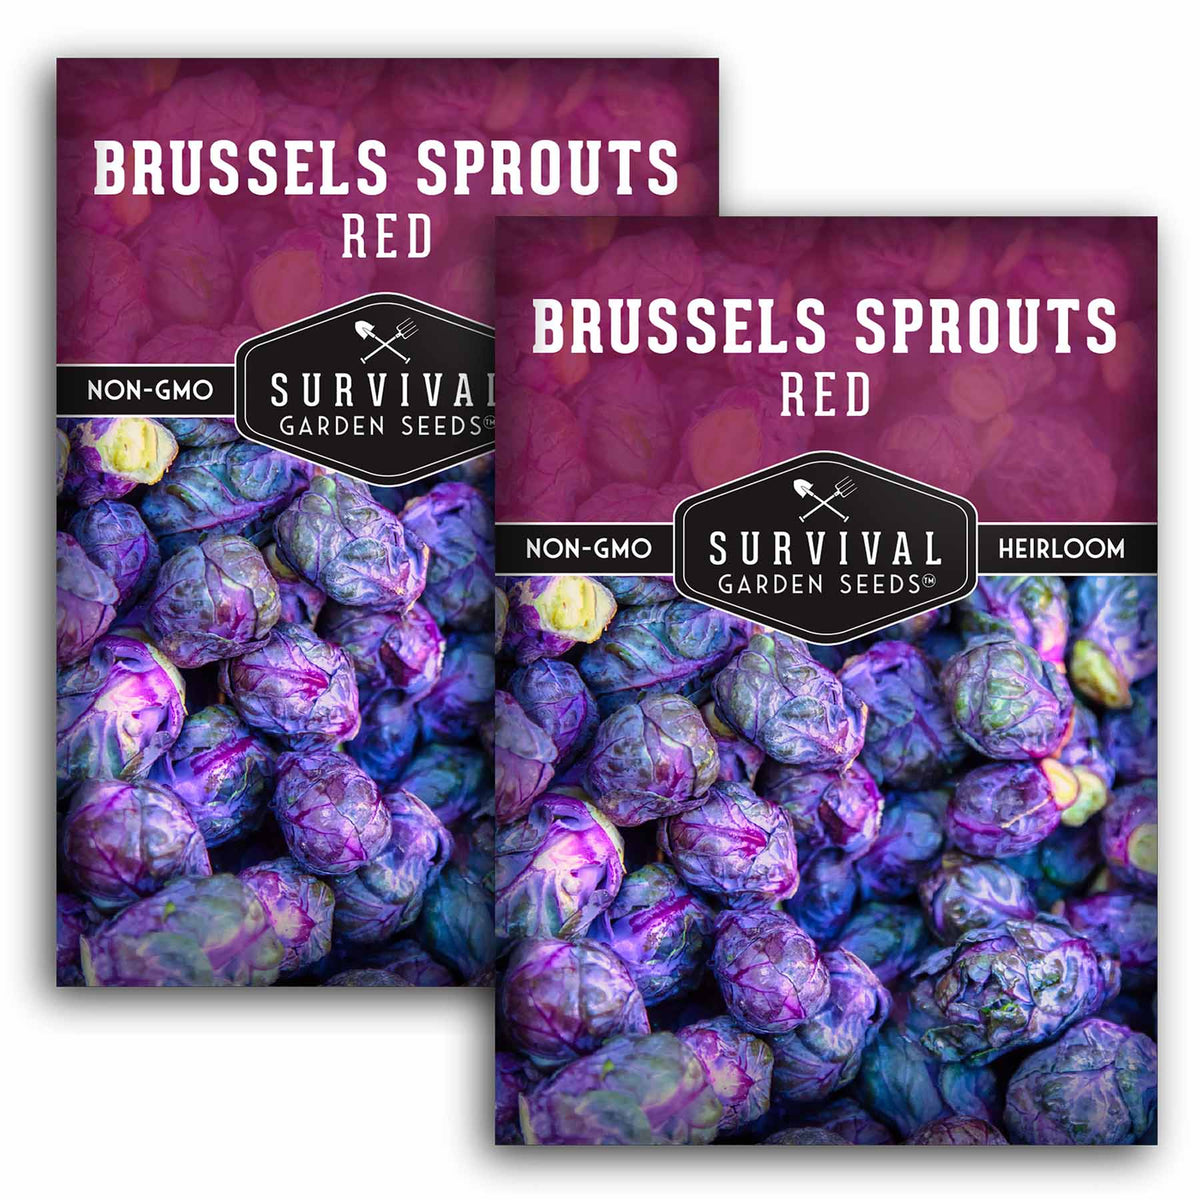 2 packets of Red Brussels Spouts seeds